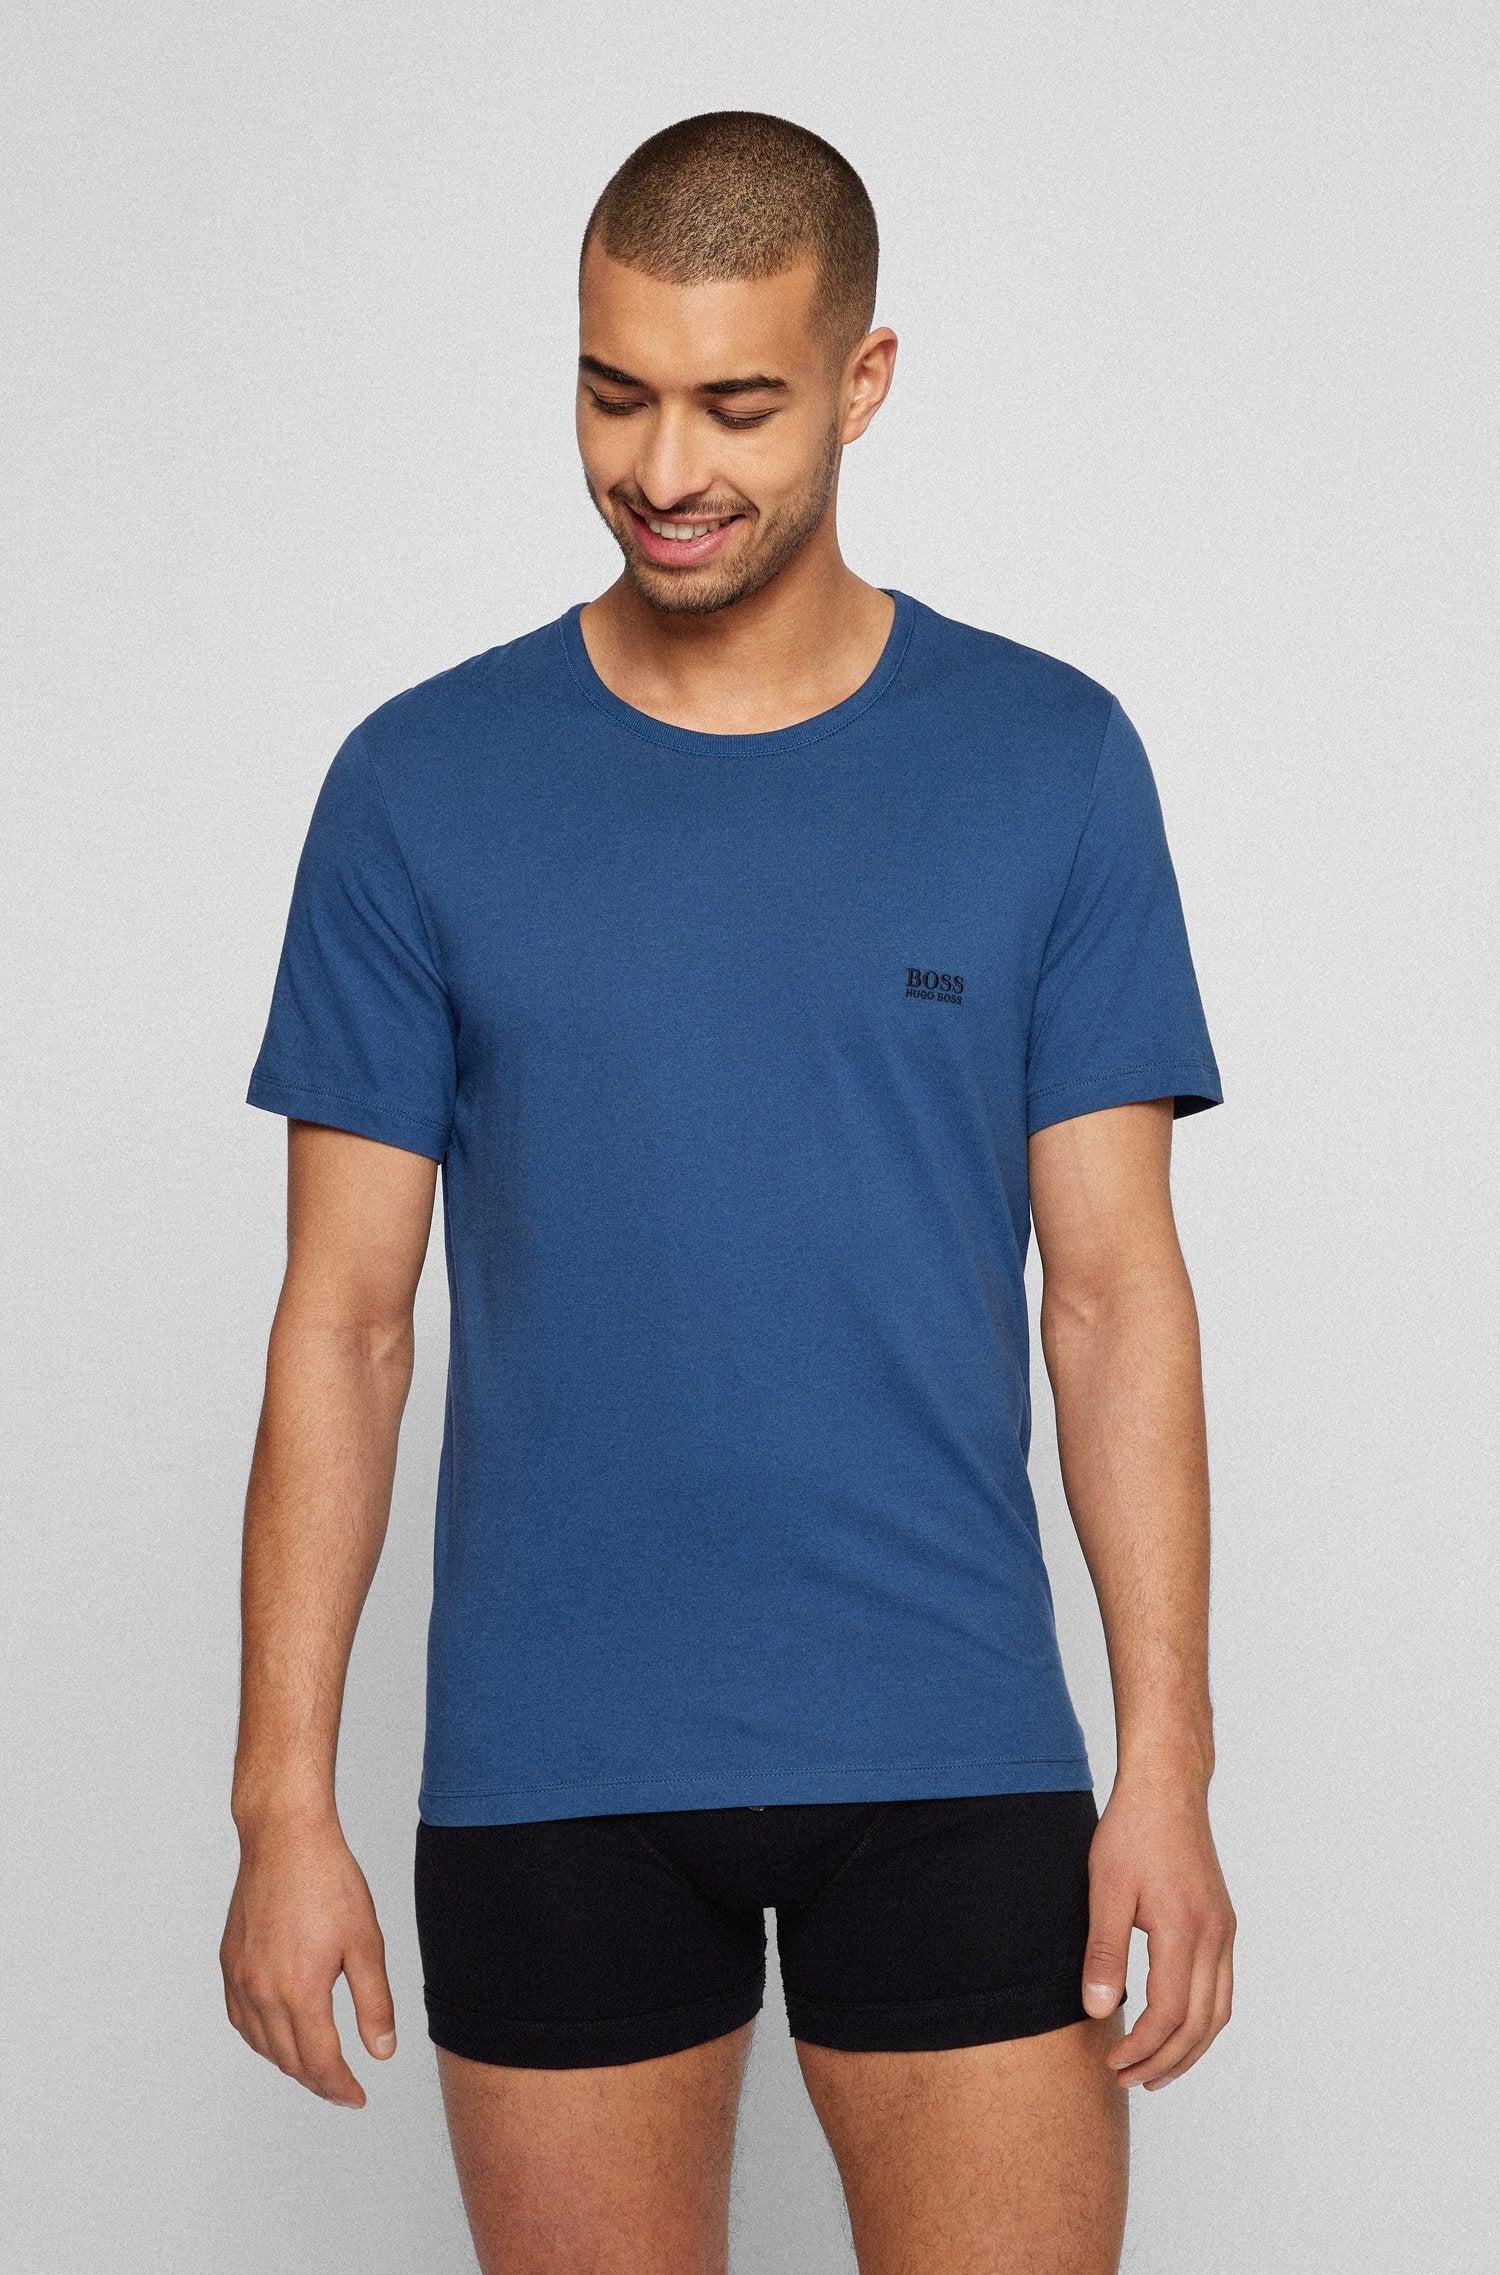 BOSS by HUGO BOSS Boss - 3-pack Of Boxed Regular-fit Cotton T-shirts for  Men | Lyst